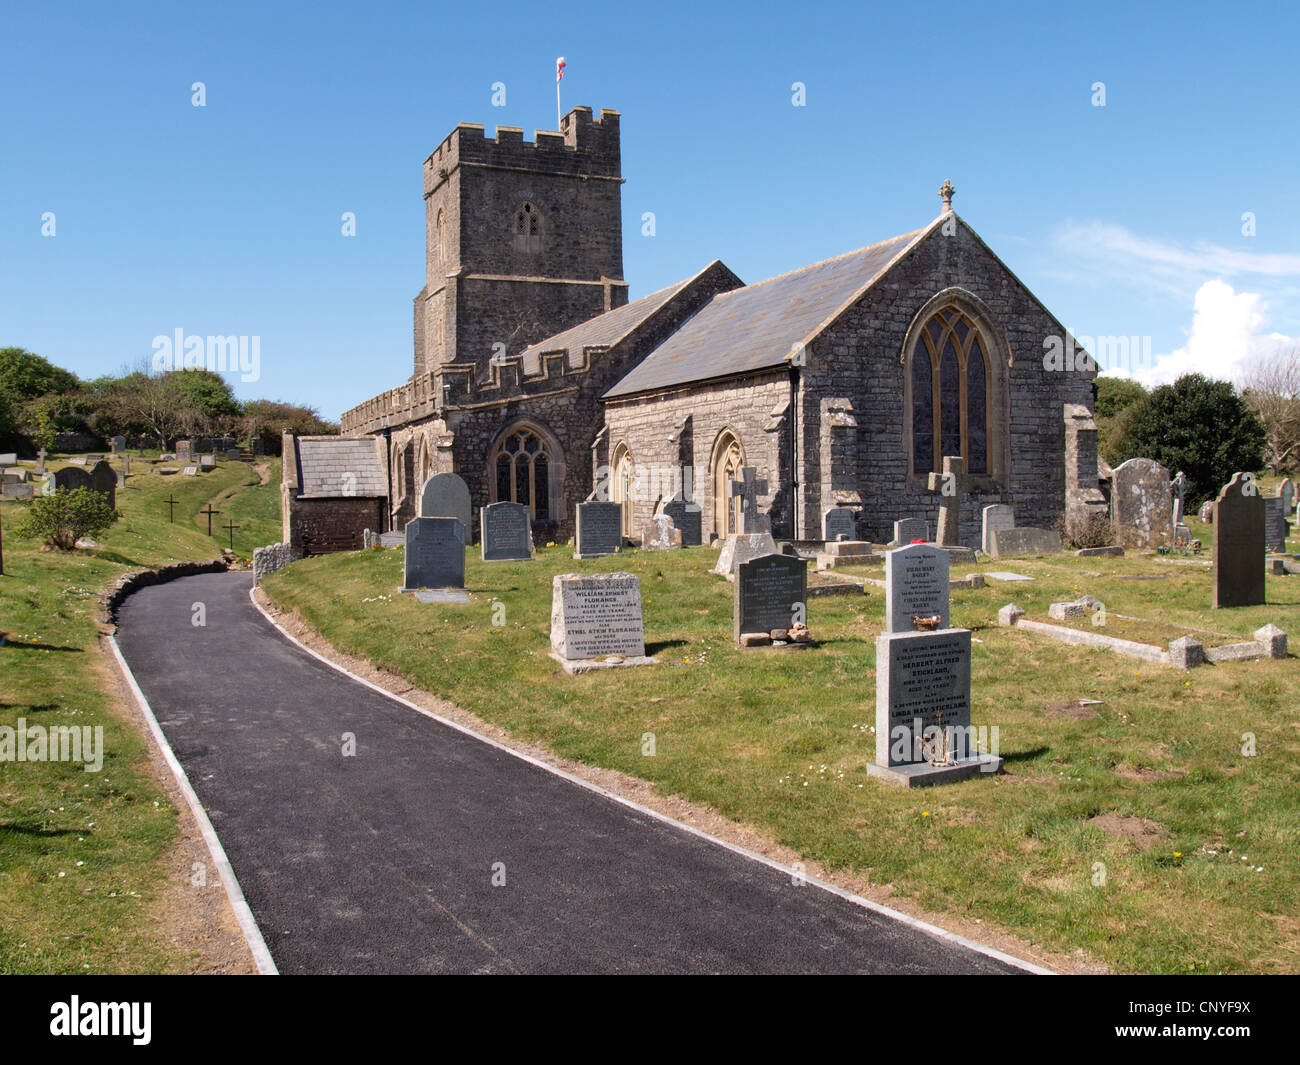 Eglise St Mary, Chabeuil, Burnham-on-Sea, Somerset, UK Banque D'Images